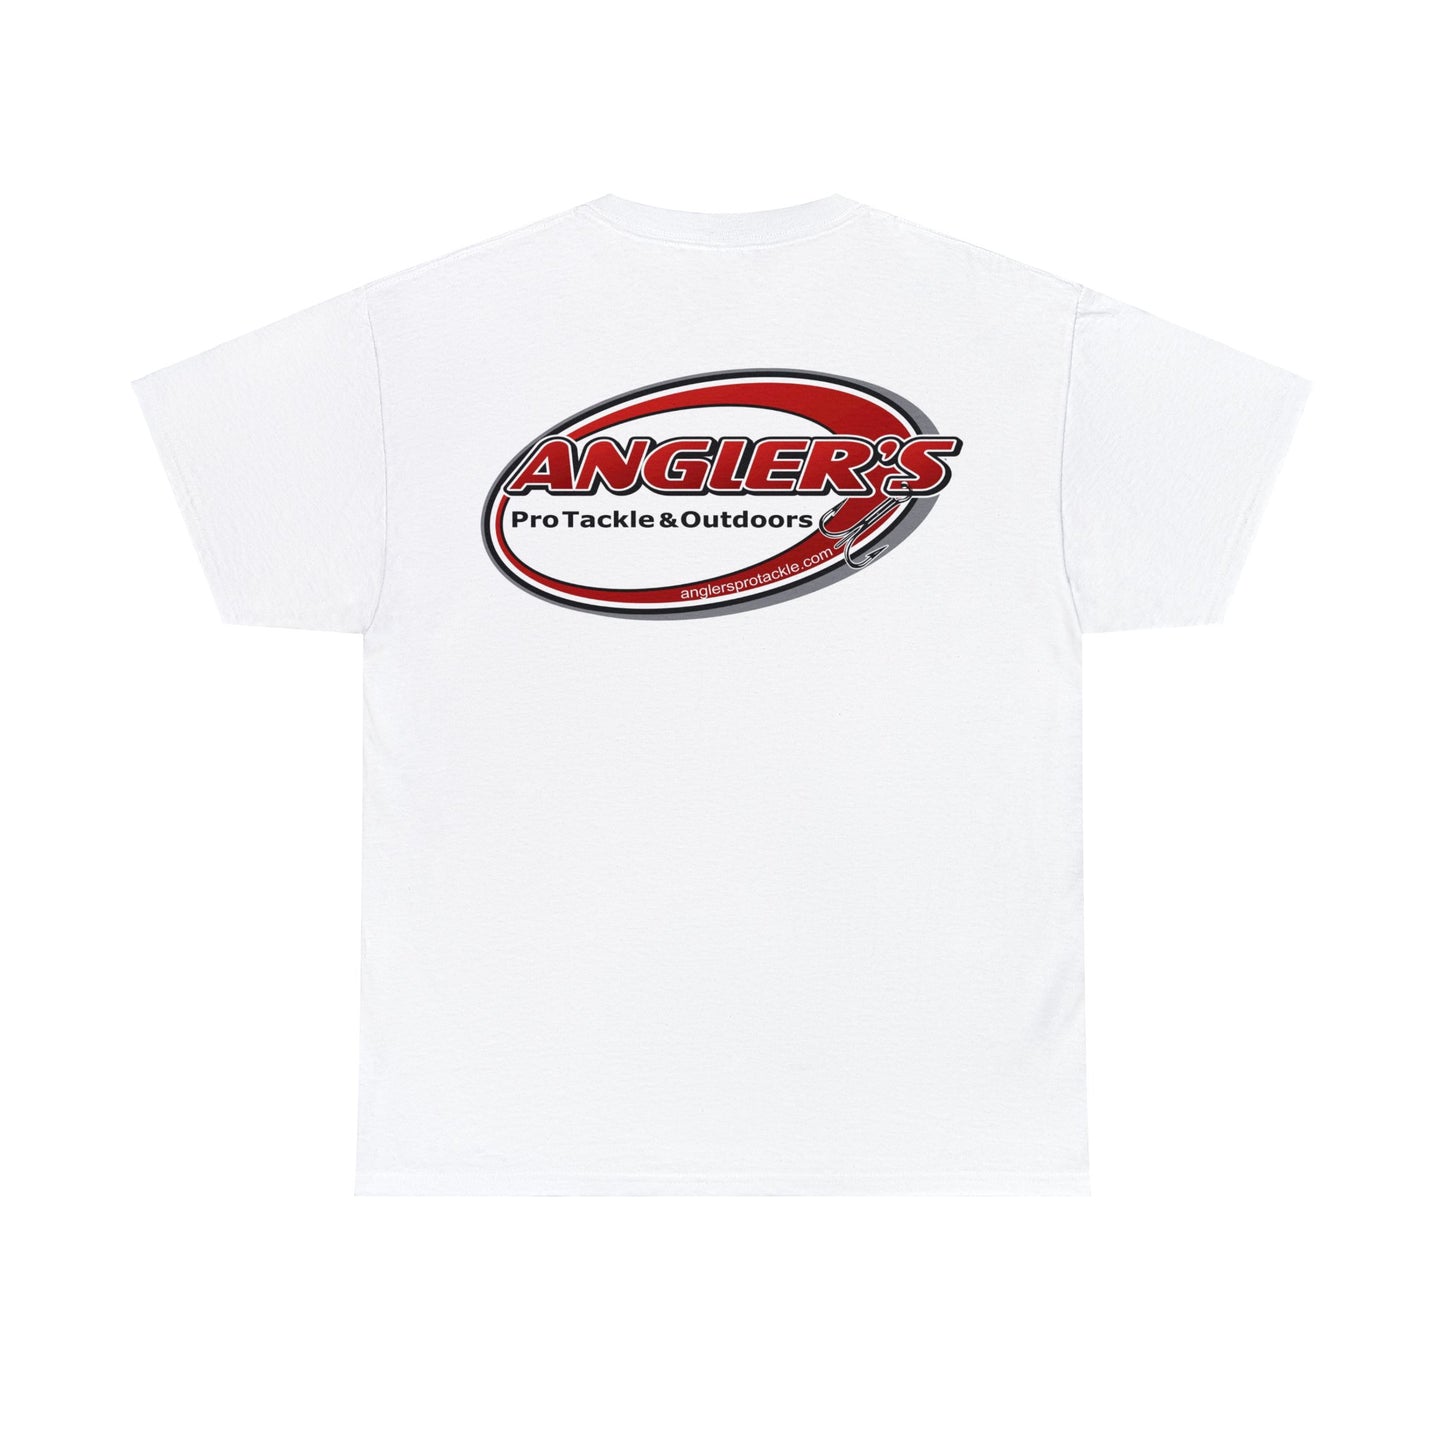 Angler's Pro Tackle & Outdoors Unisex Heavy Cotton Tee